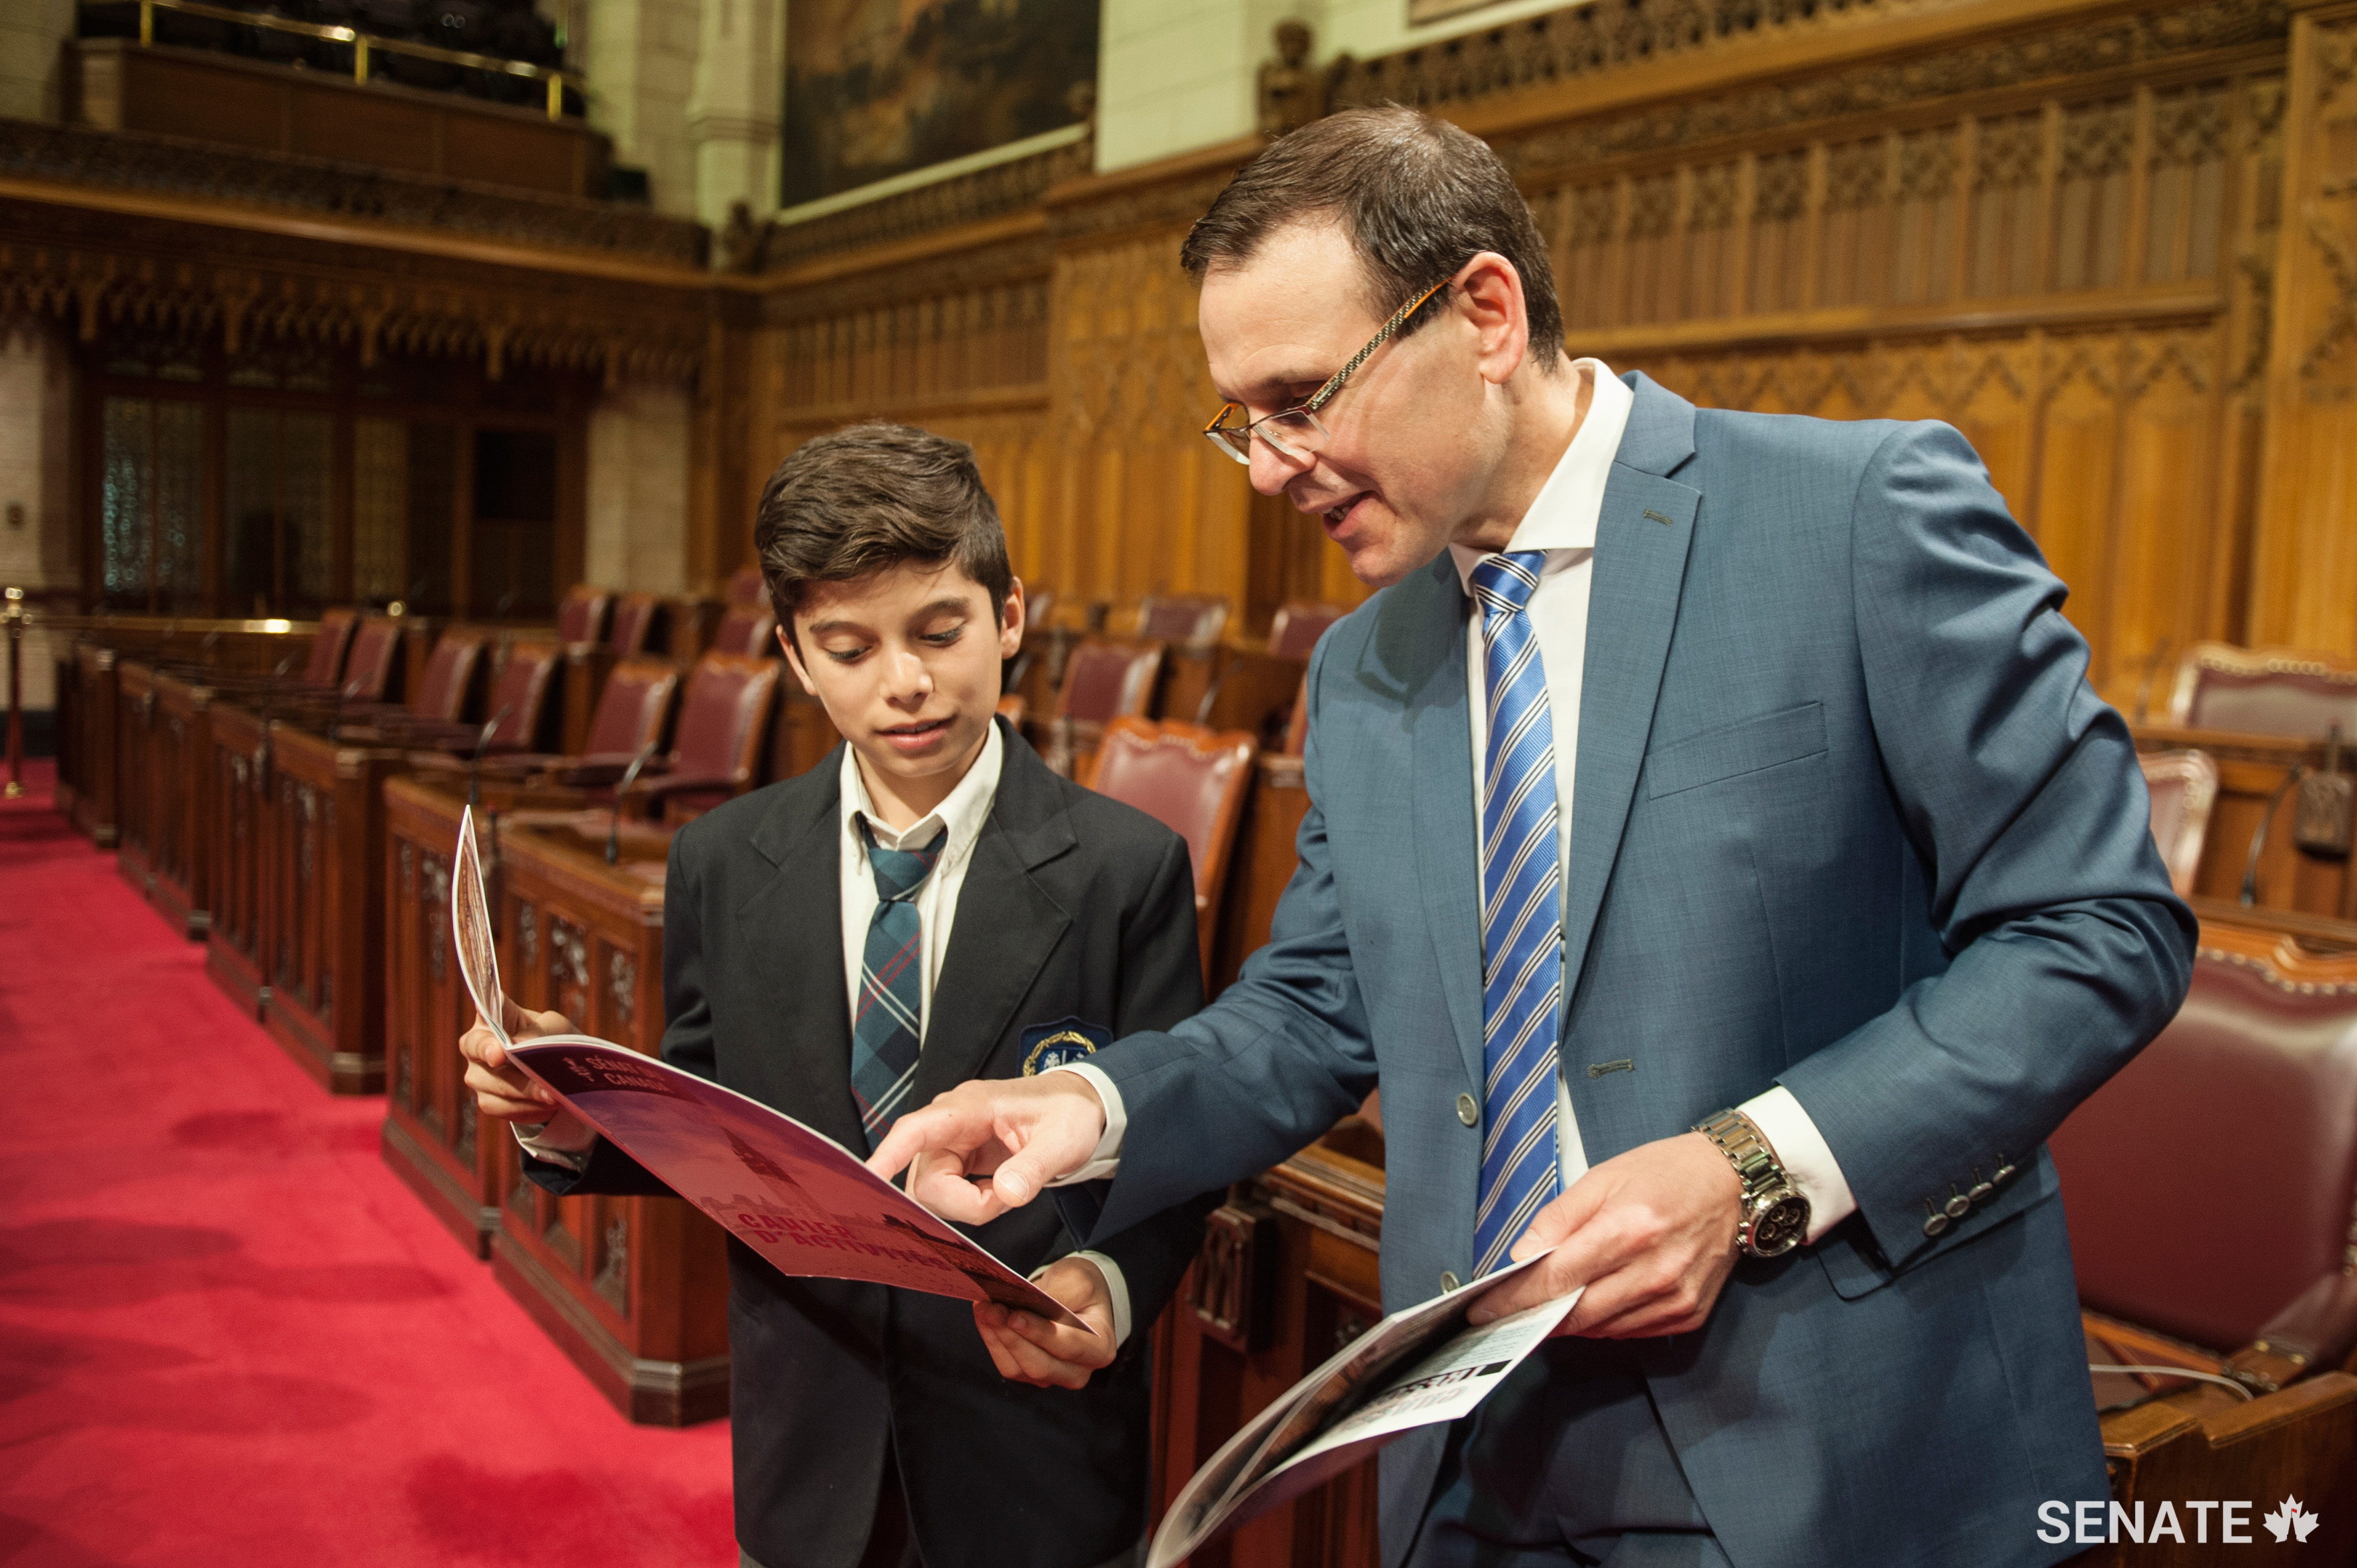 Senator Housakos compares notes with a student — some of the questions in the Senate’s new activity booklet are tough!